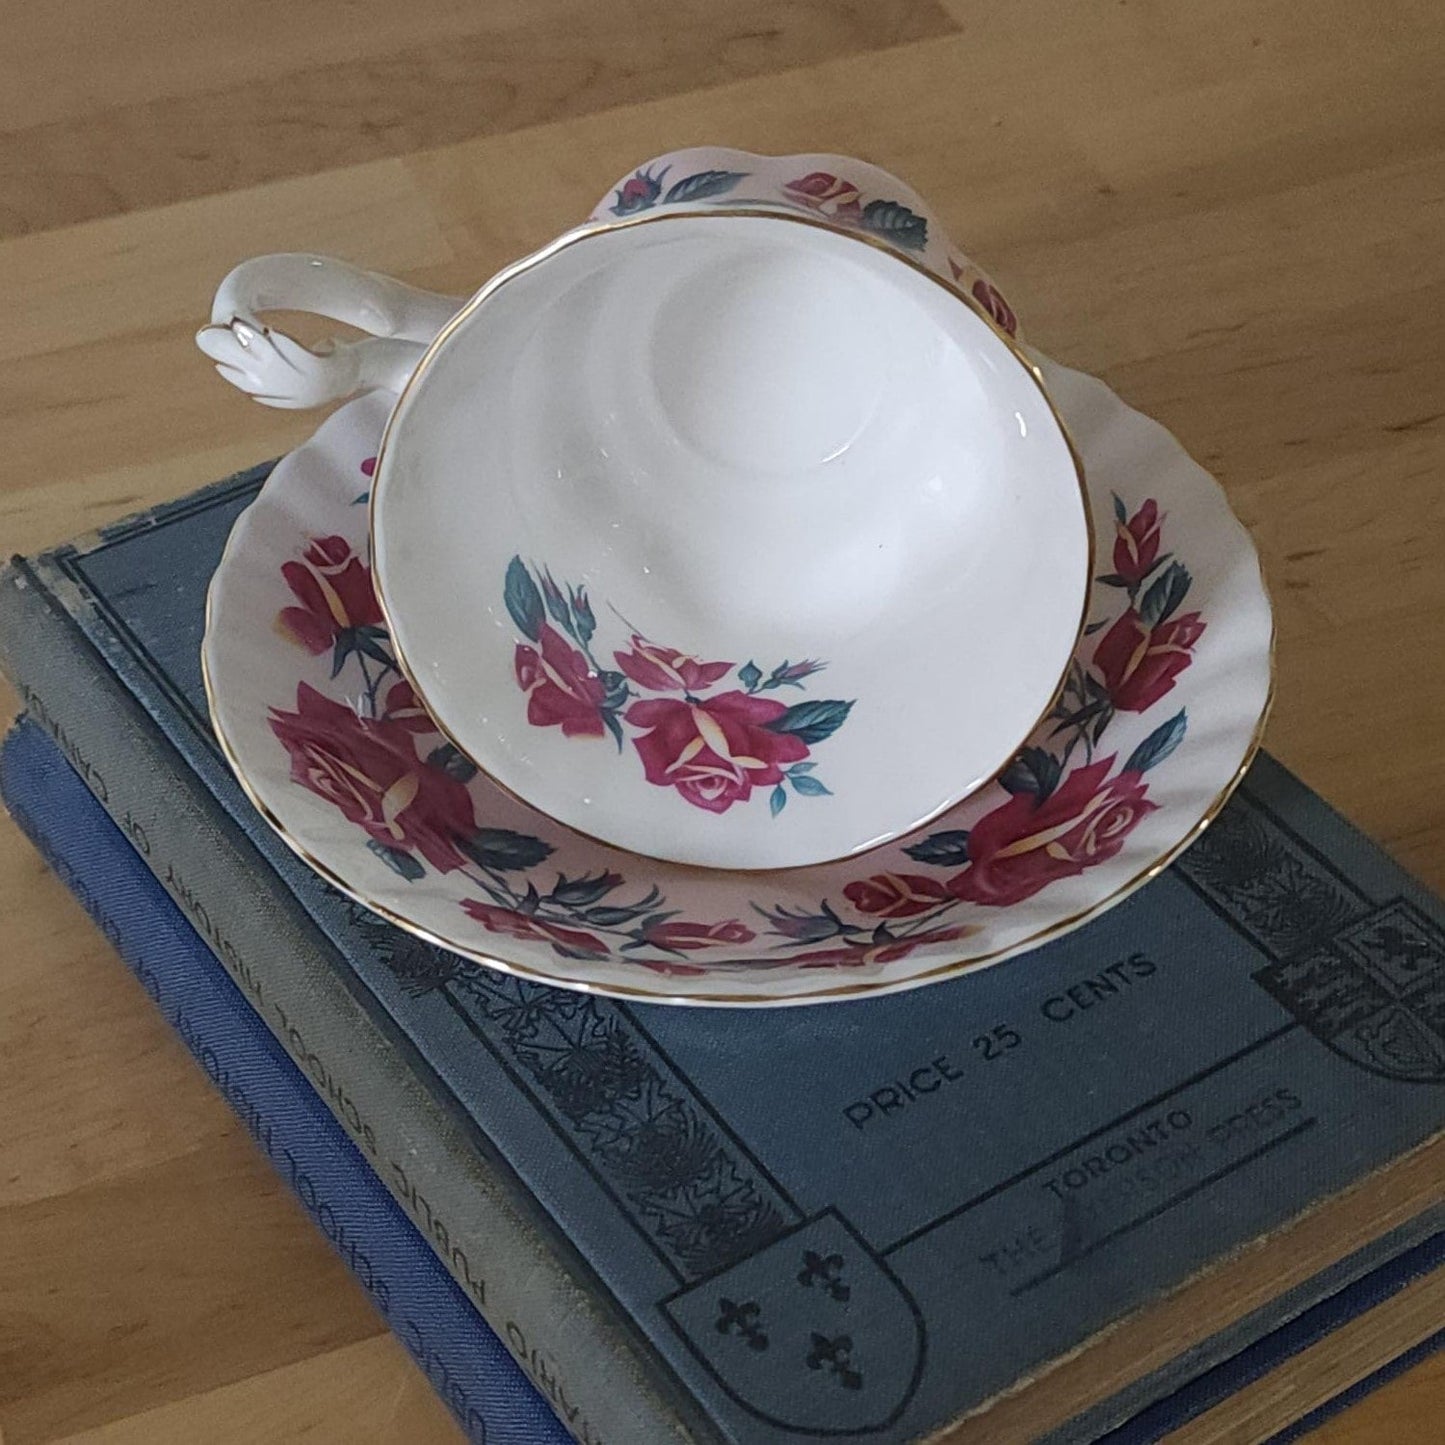 A tea cup and saucer resting on a stack of books, creating a cozy and intellectual ambiance.